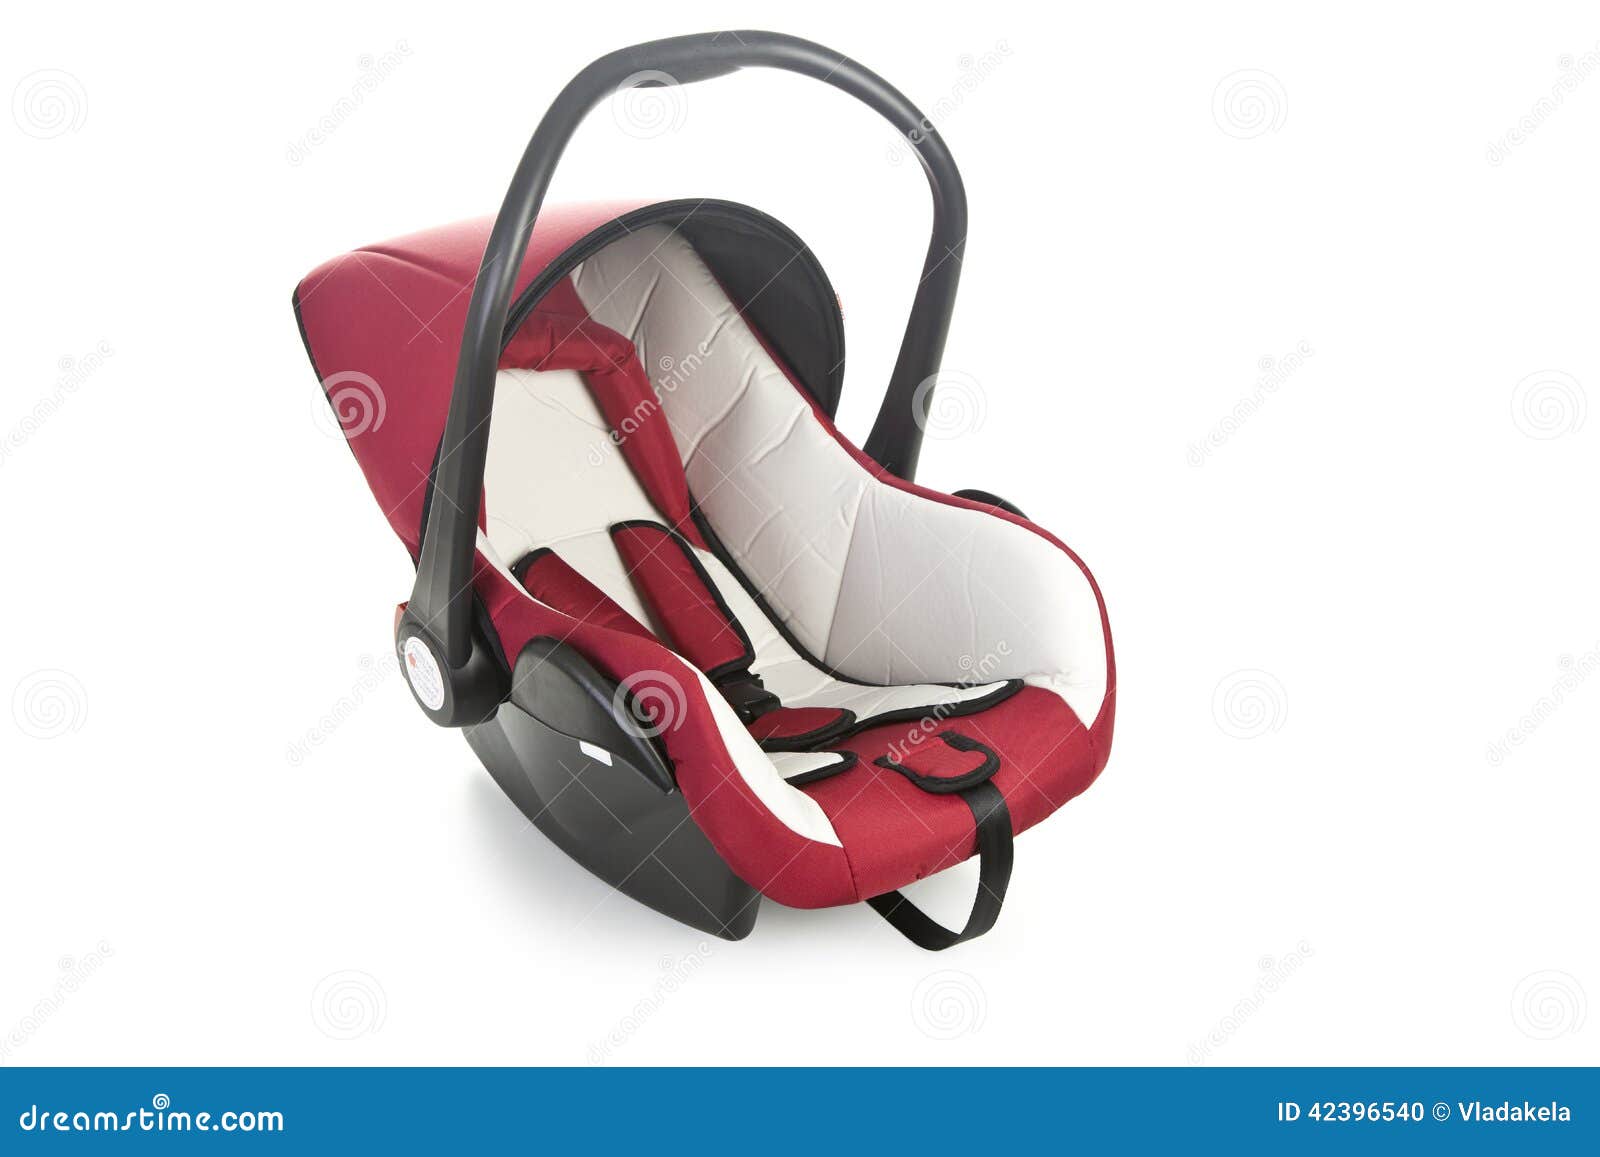 31,116 Car Seat Isolated Royalty-Free Photos and Stock Images